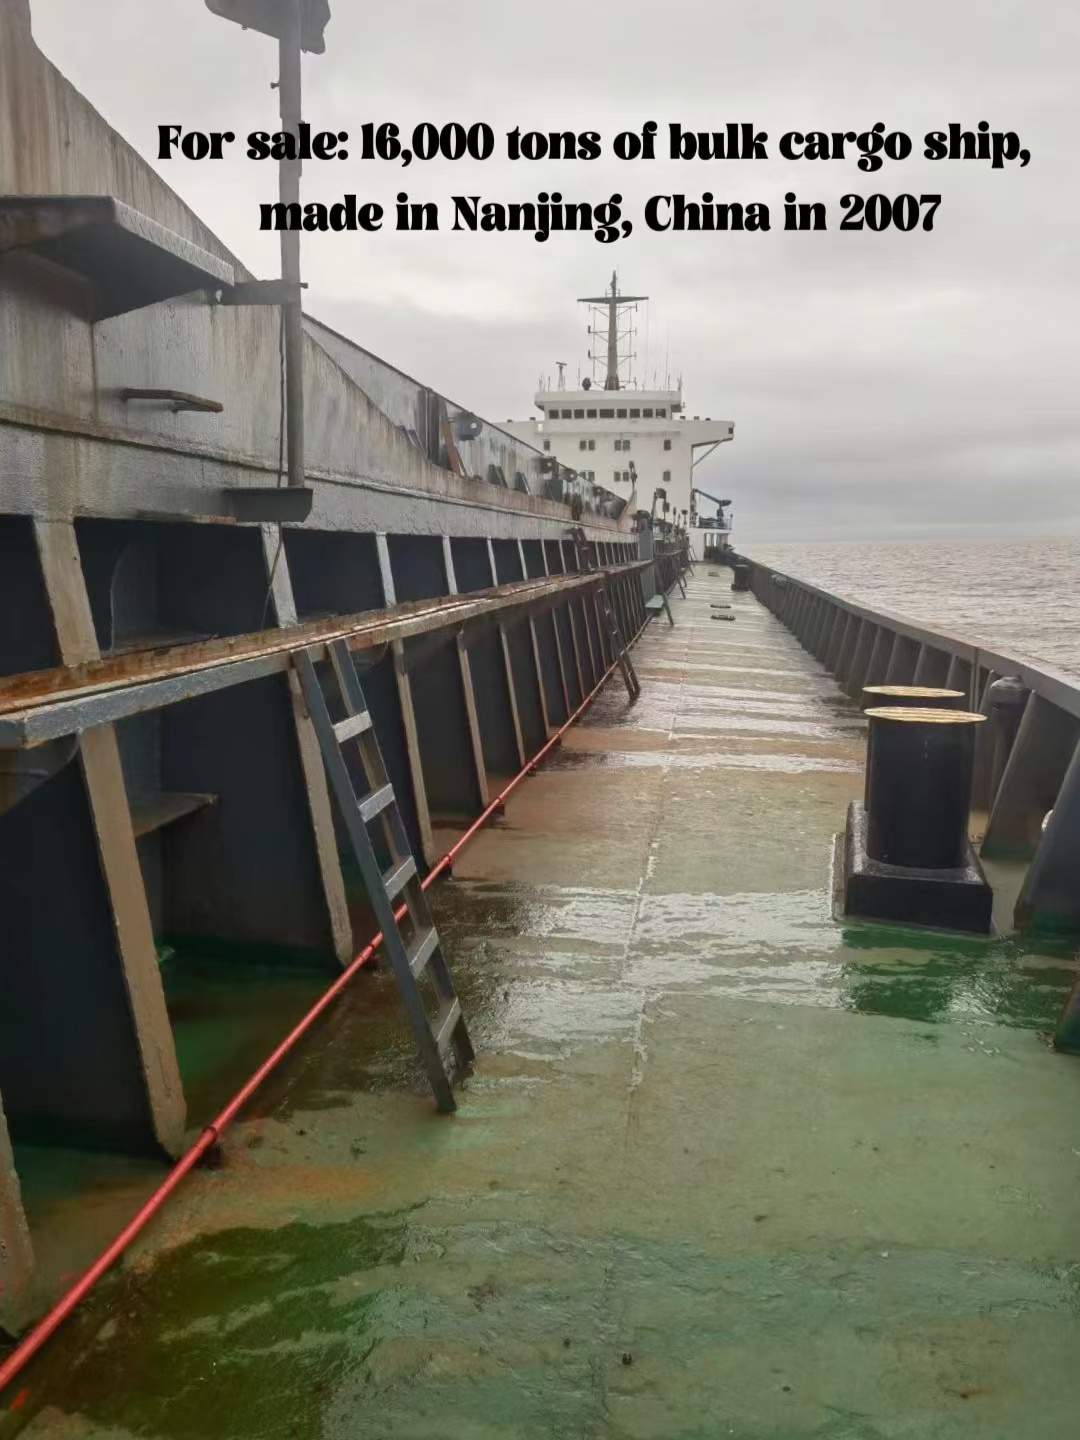 For sale: 16,000 tons of bulk cargo ship, made in Nanjing, China in 2007